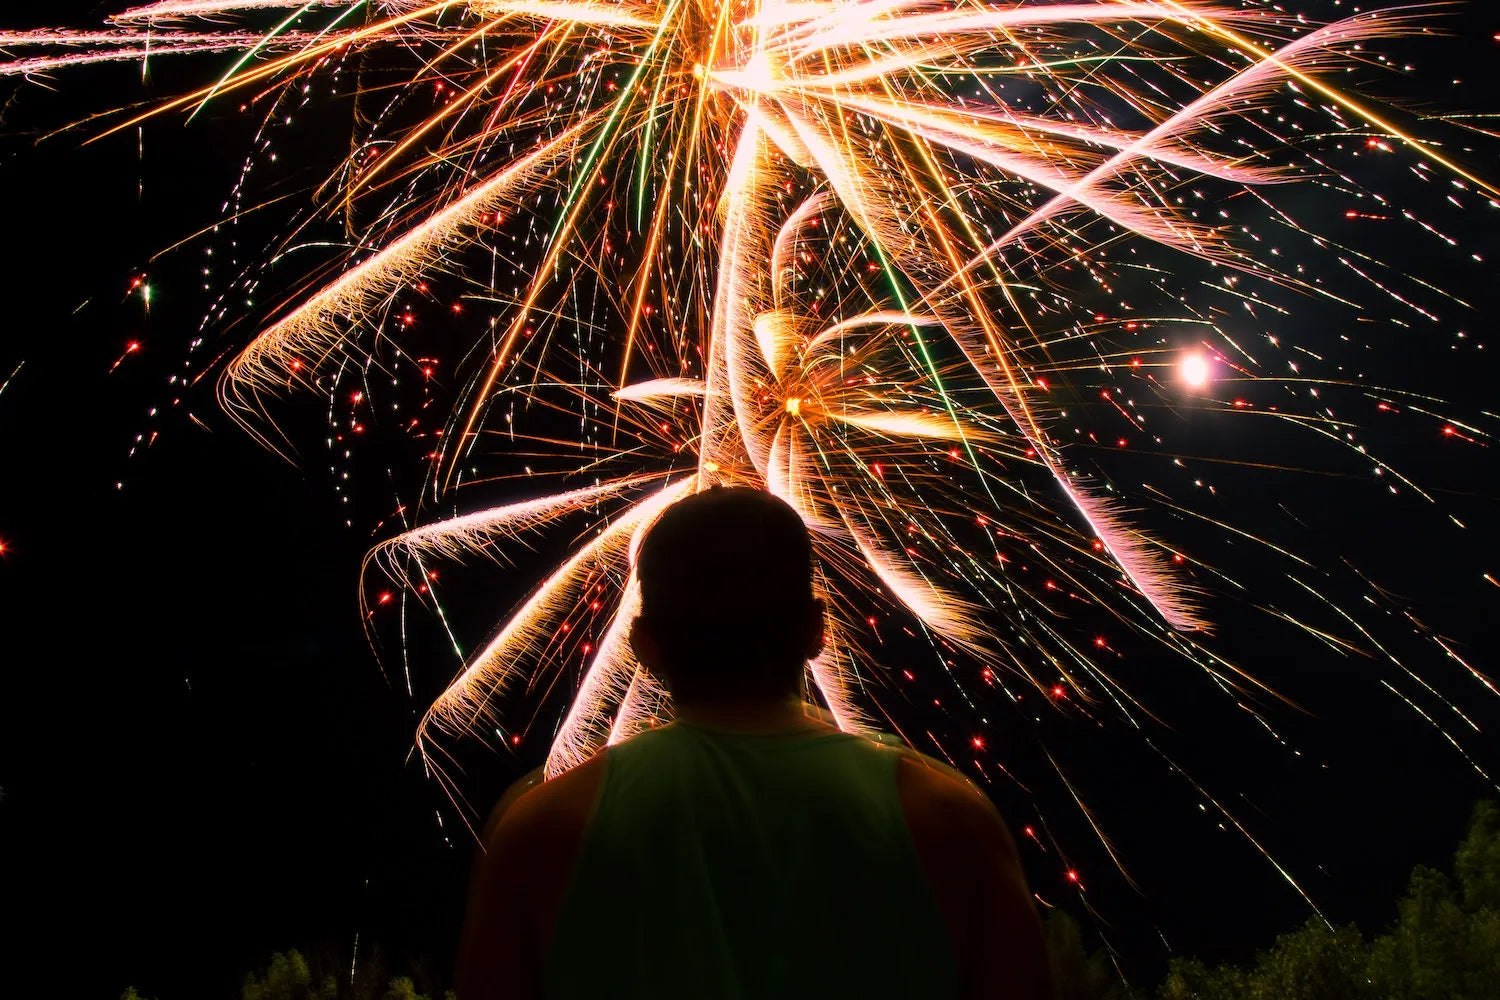 How to Photograph Fireworks: 7 Easy Tips